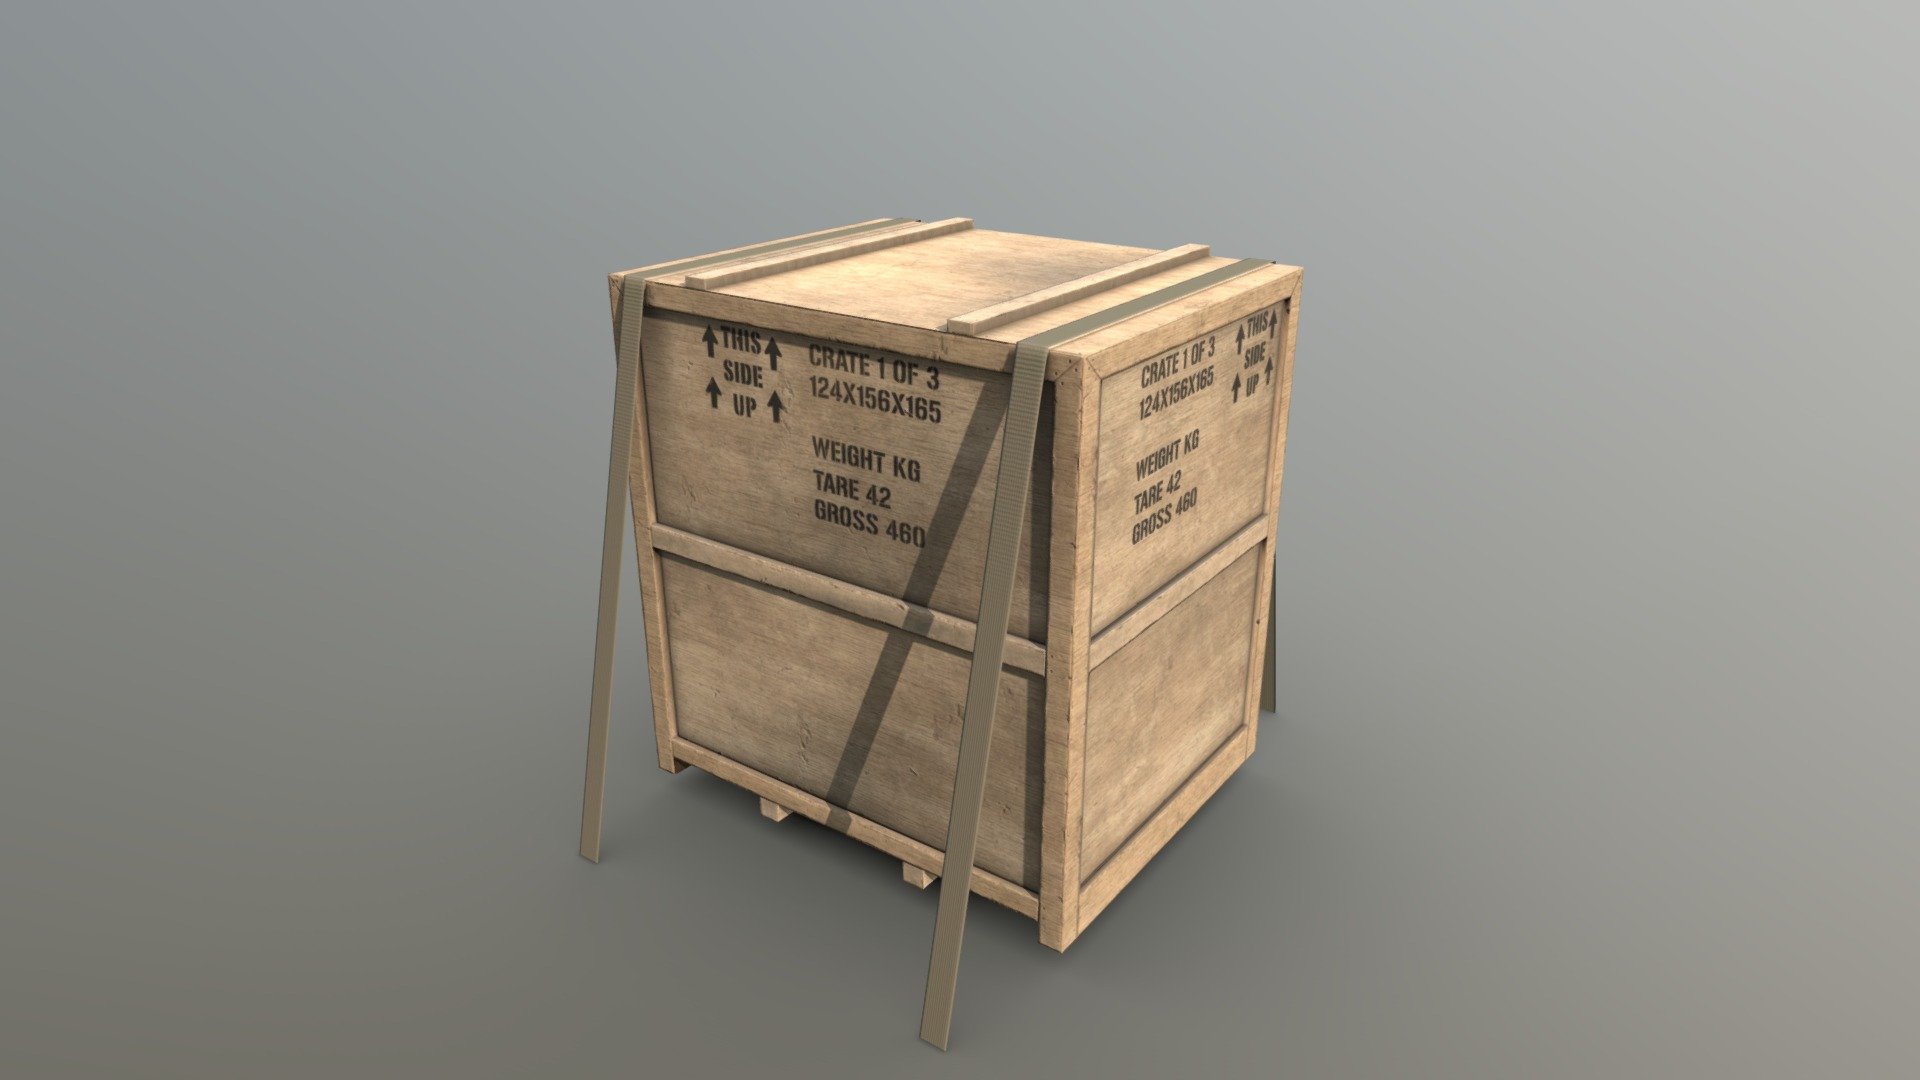 i felt like uploading something

Substance Painter 2; Blender 2.79 - a cargo crate with straps - 3D model by midnight_coffee 3d model